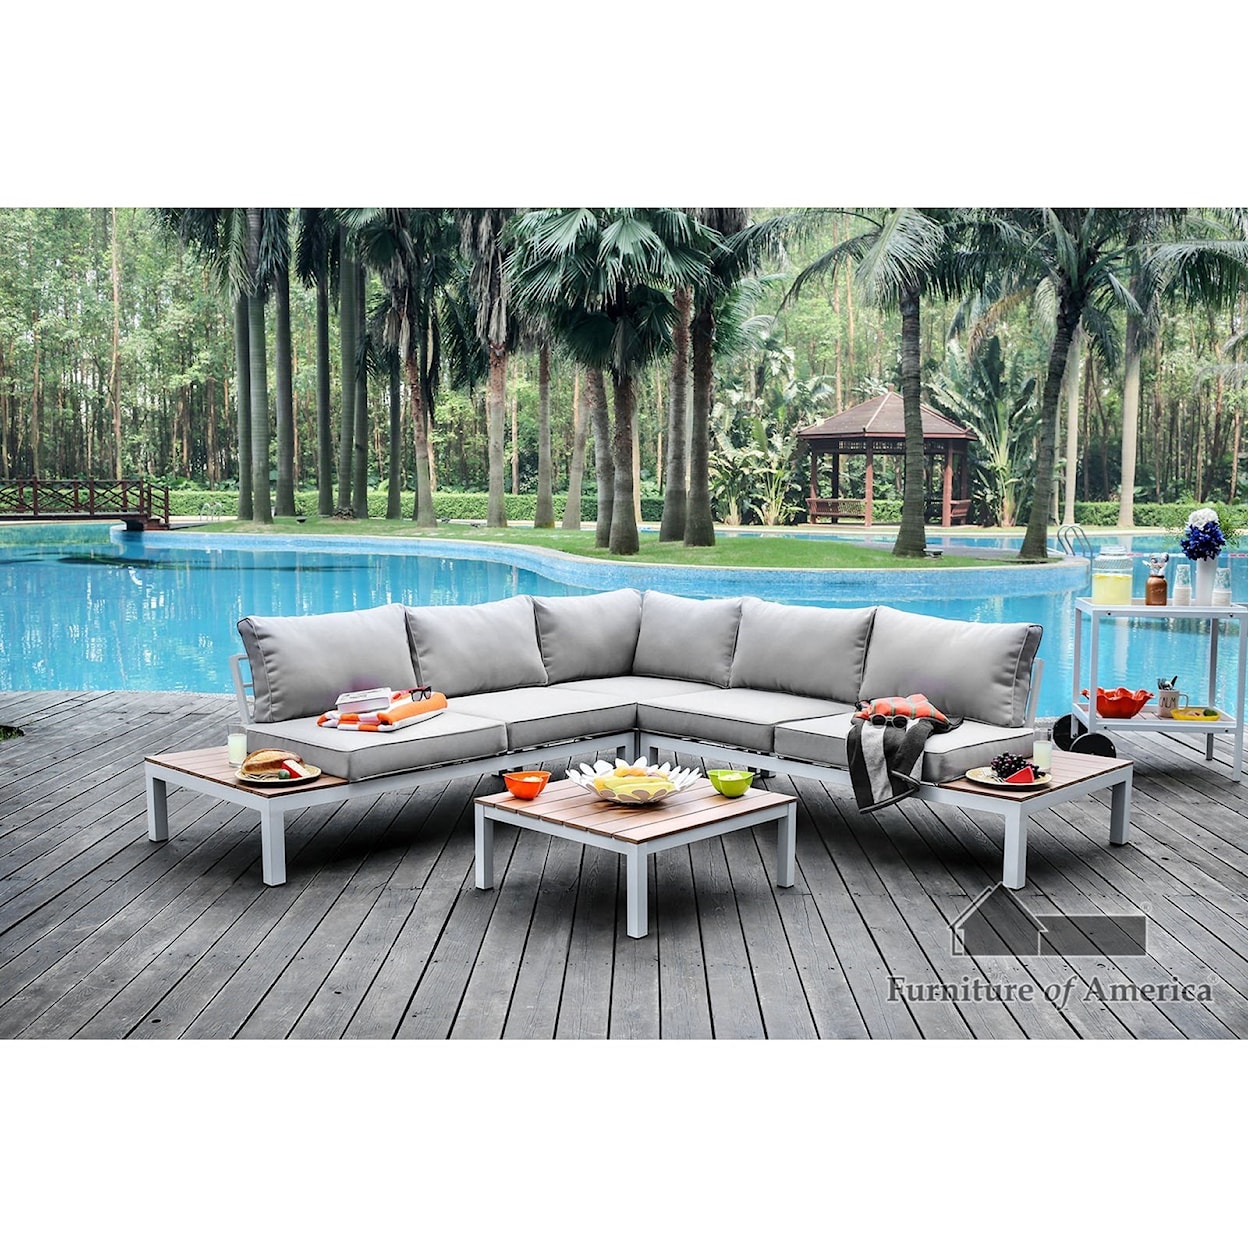 Furniture of America Winona Patio Sectional with Table